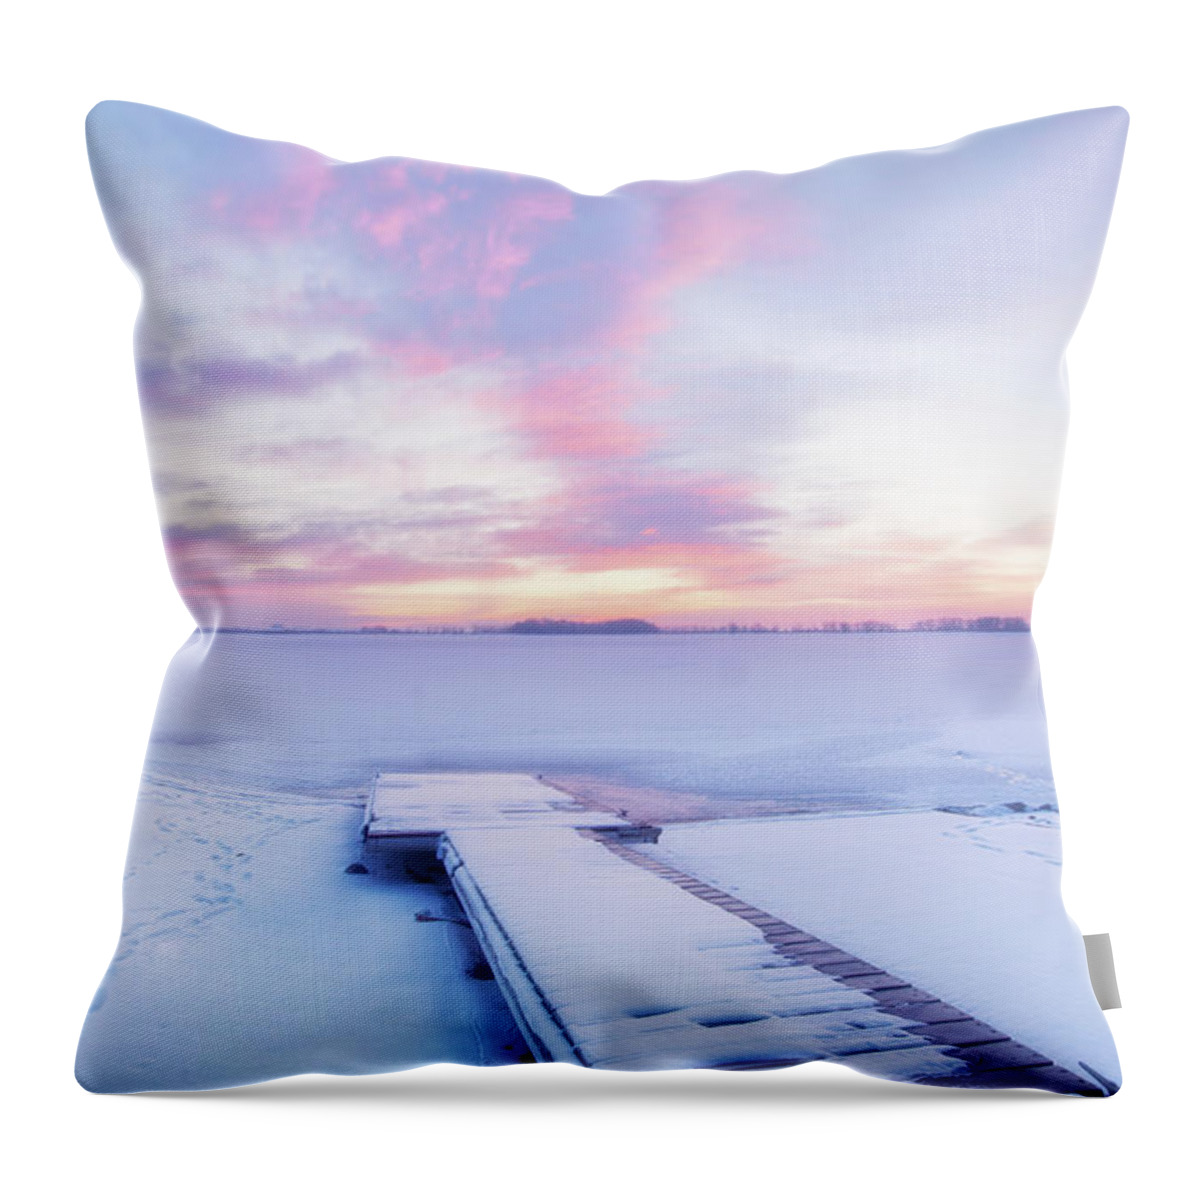 Lake Throw Pillow featuring the photograph No Fishing Today by Ronda Kimbrow